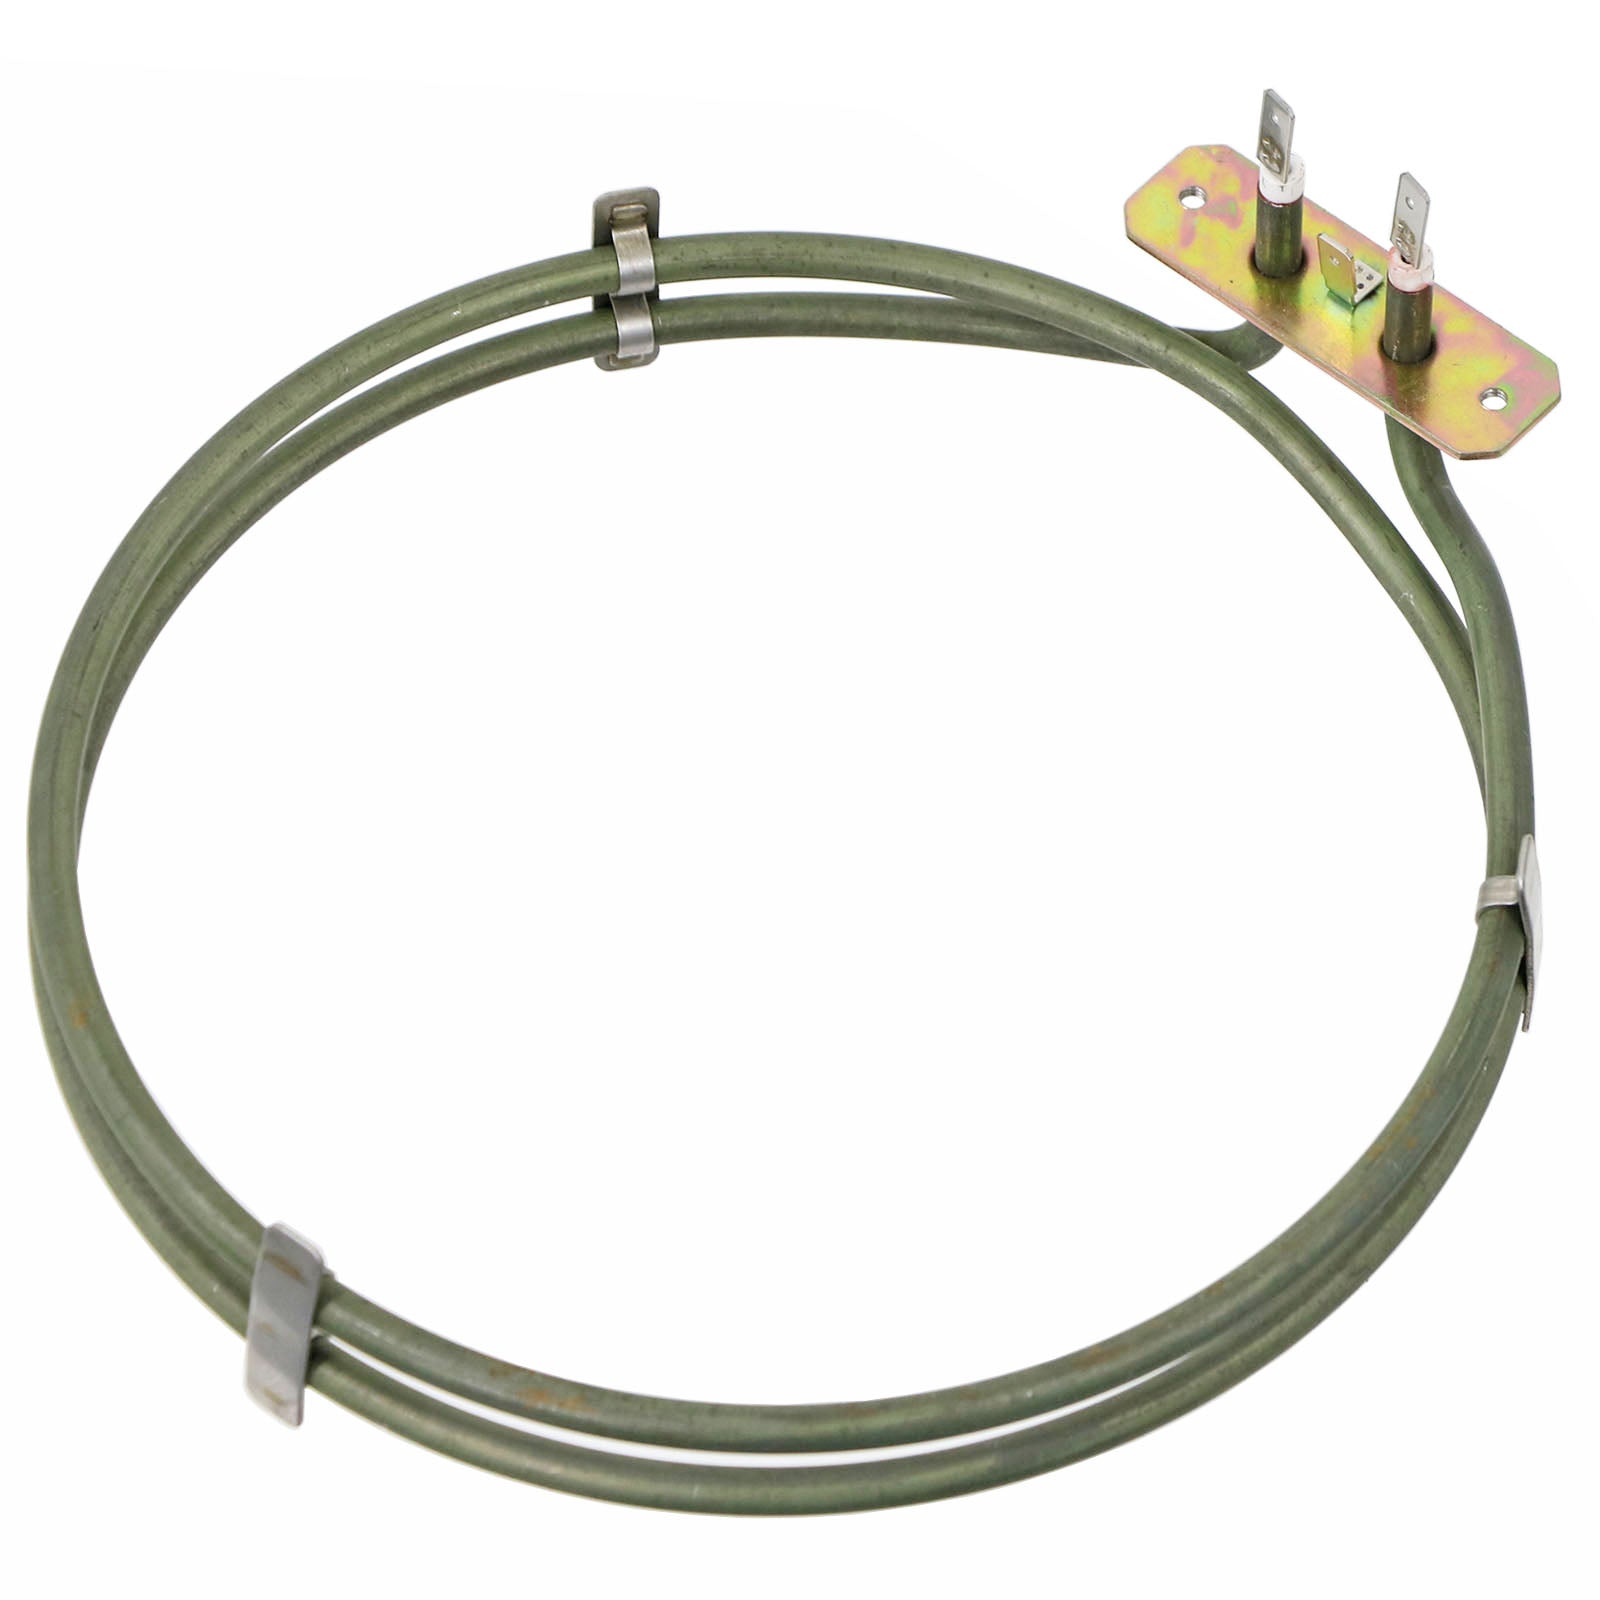 2100W Heater Element compatible with Hygena AE6BMS Fan Oven / Cooker